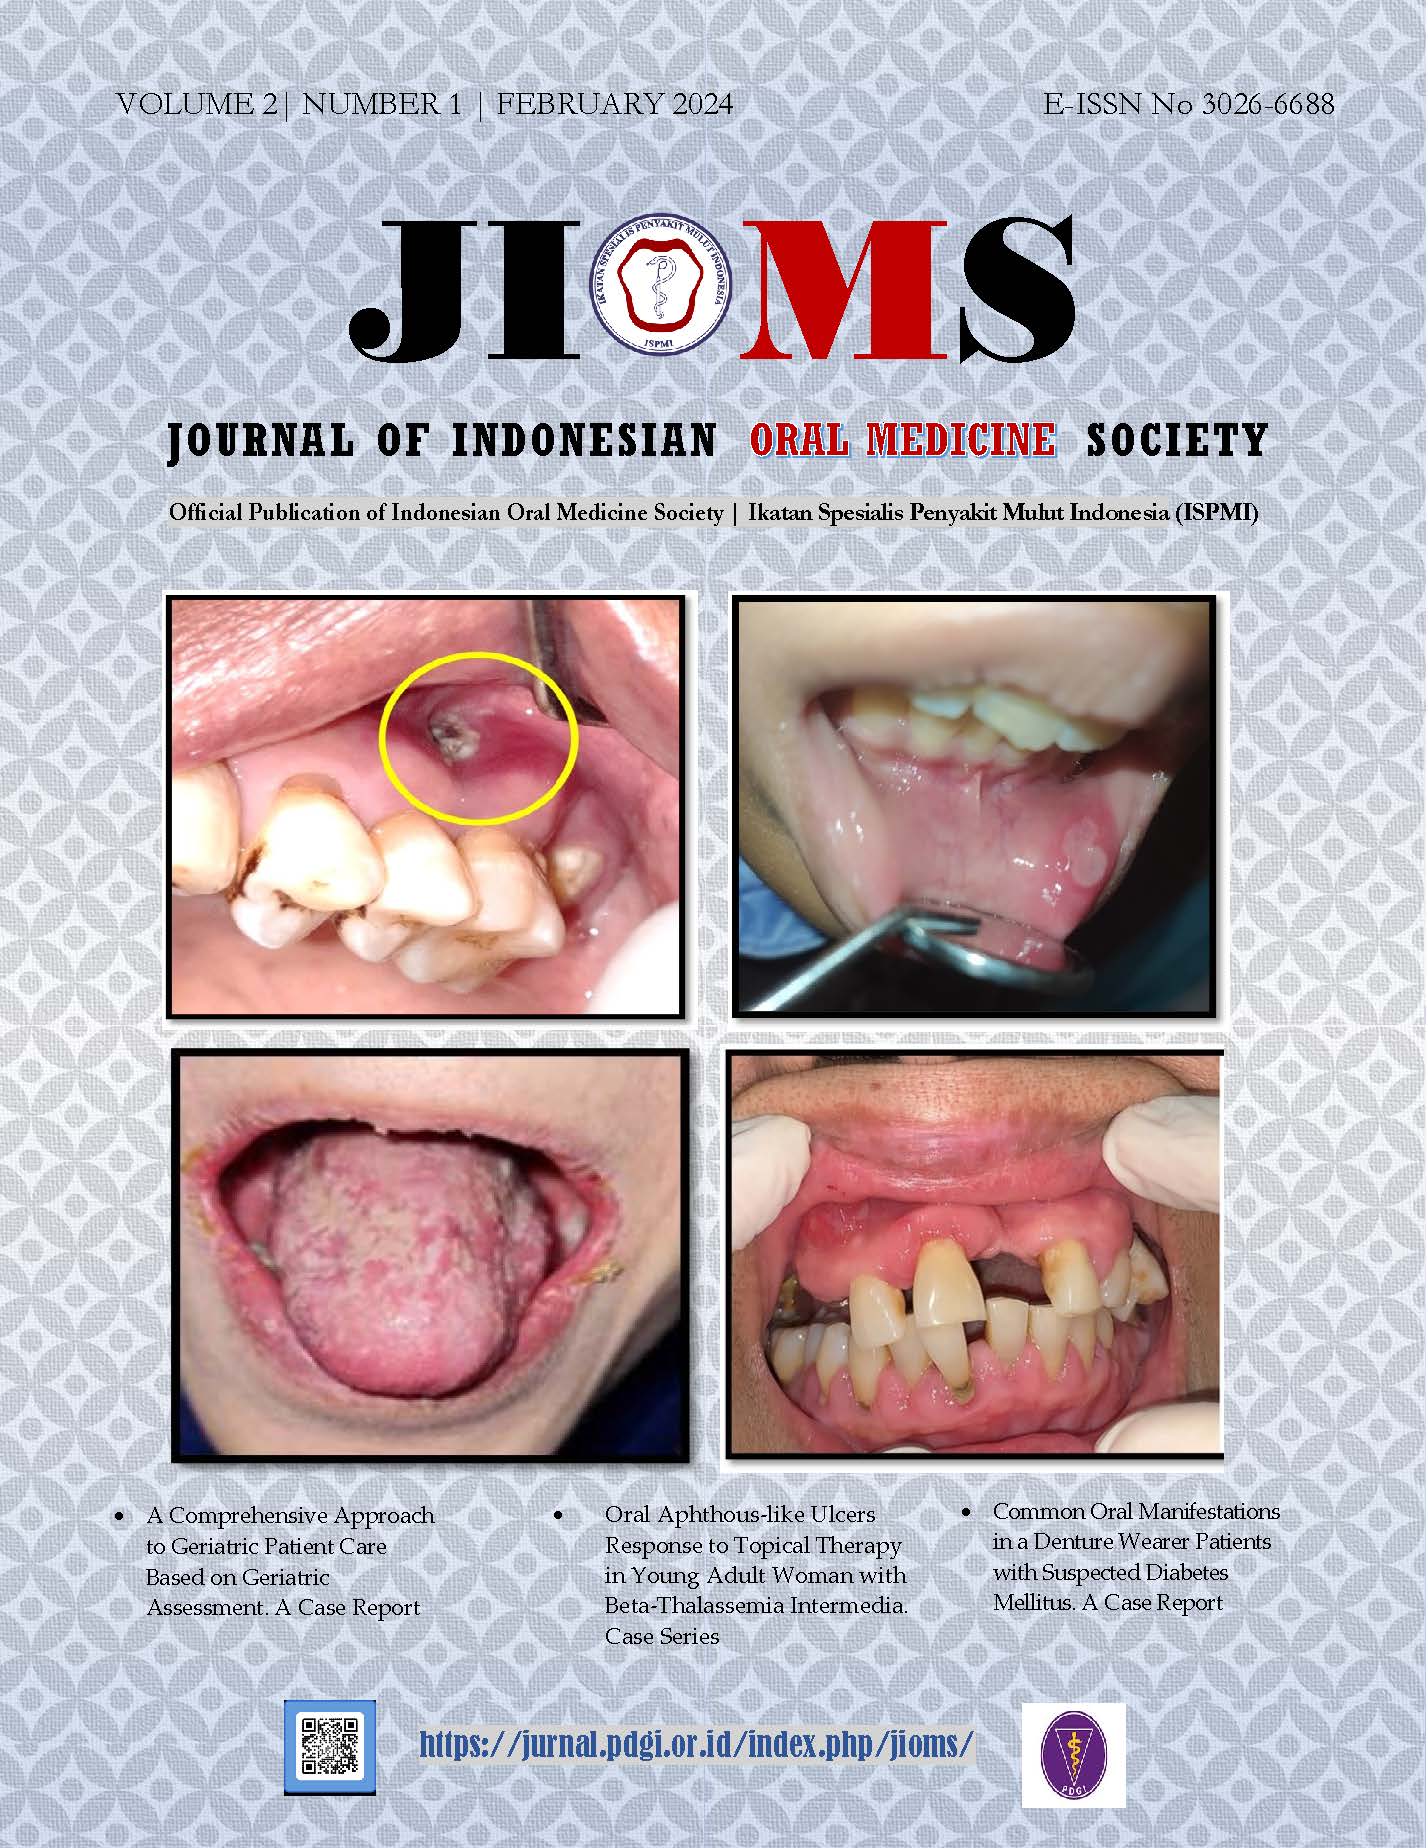 Cover of volume 2 number 1 JIOMS clinical pictures